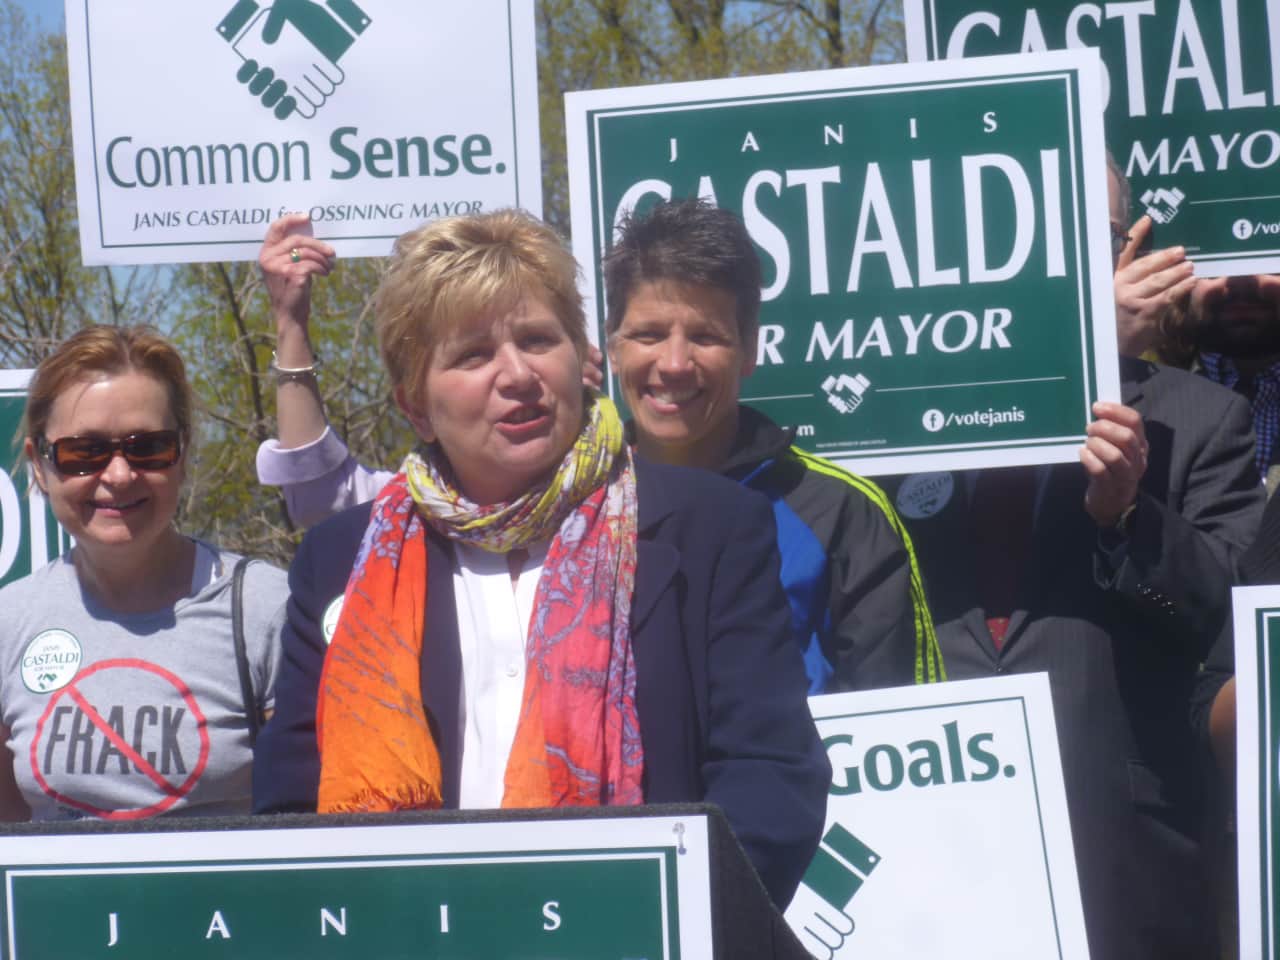 Janet Castaldi announced her candidacy for mayor of Ossining.